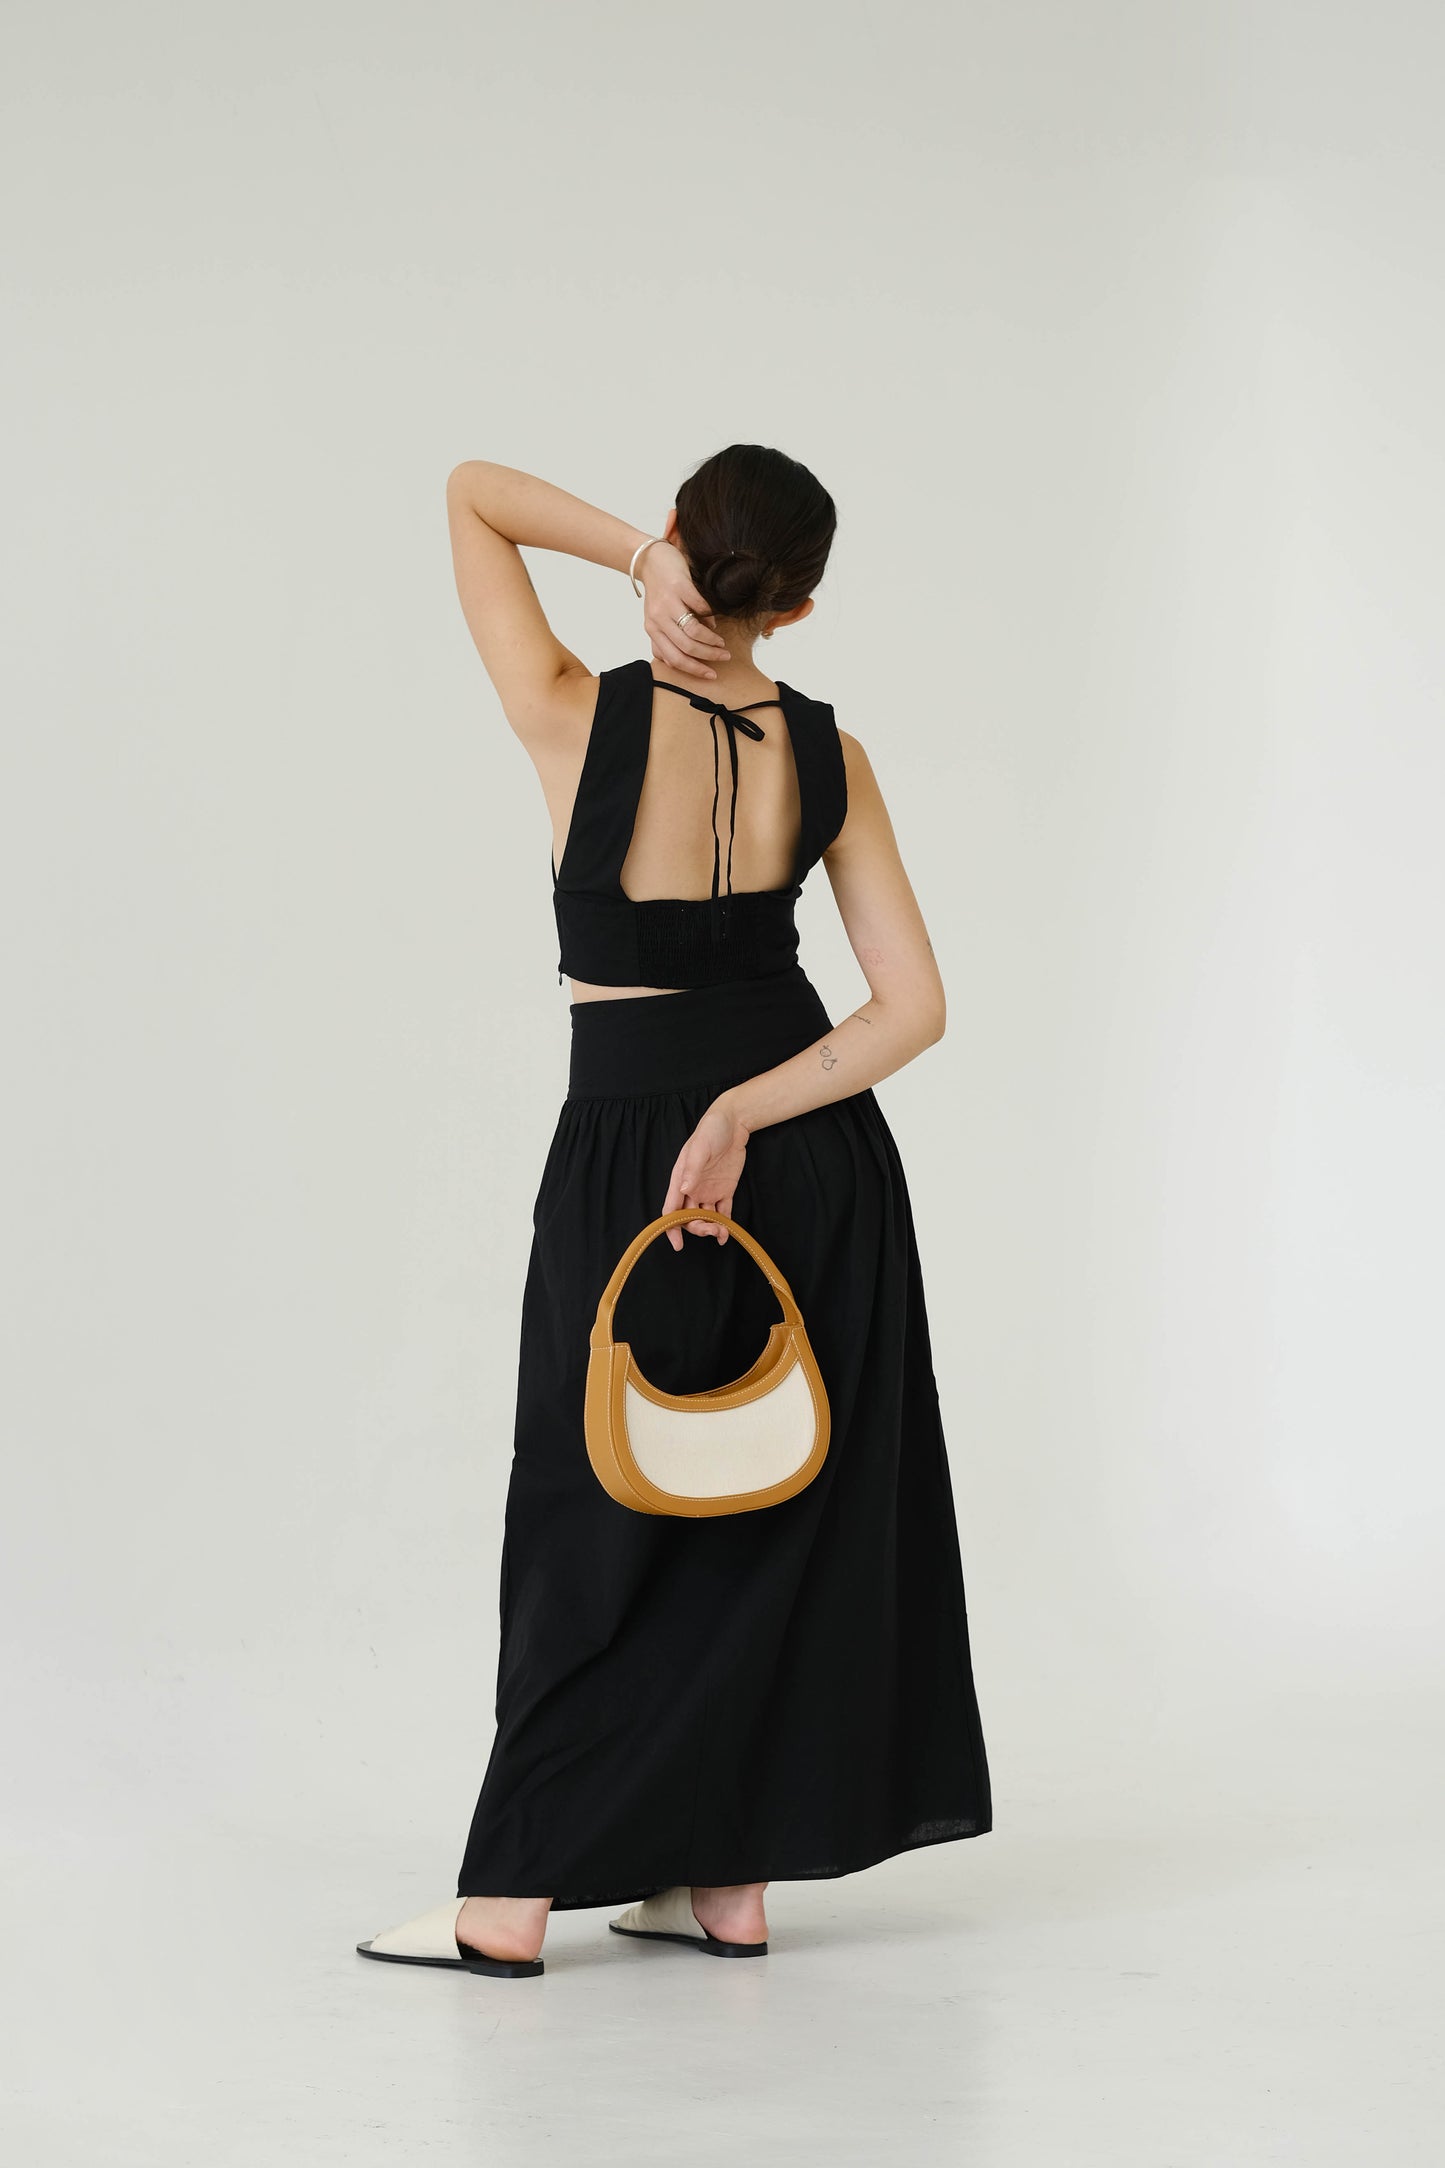 V-neck Sleeveless tank top + Long Dress in Classic Black in suit